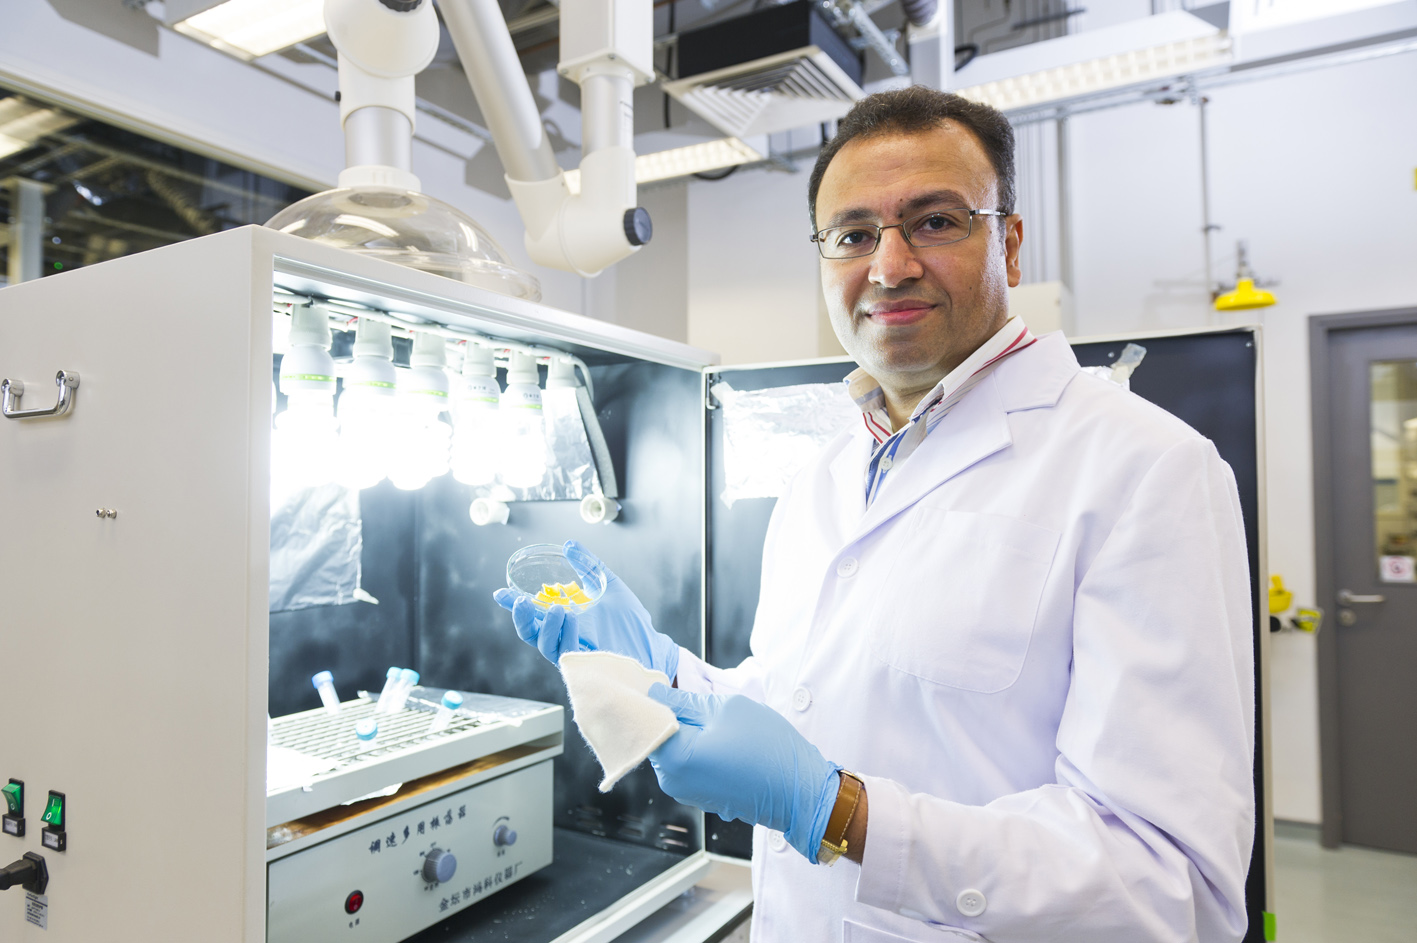 Dr Walid Daoud develops nano-sized photocatalysts that enable cashmere fibres to clean themselves. Photo: CityU